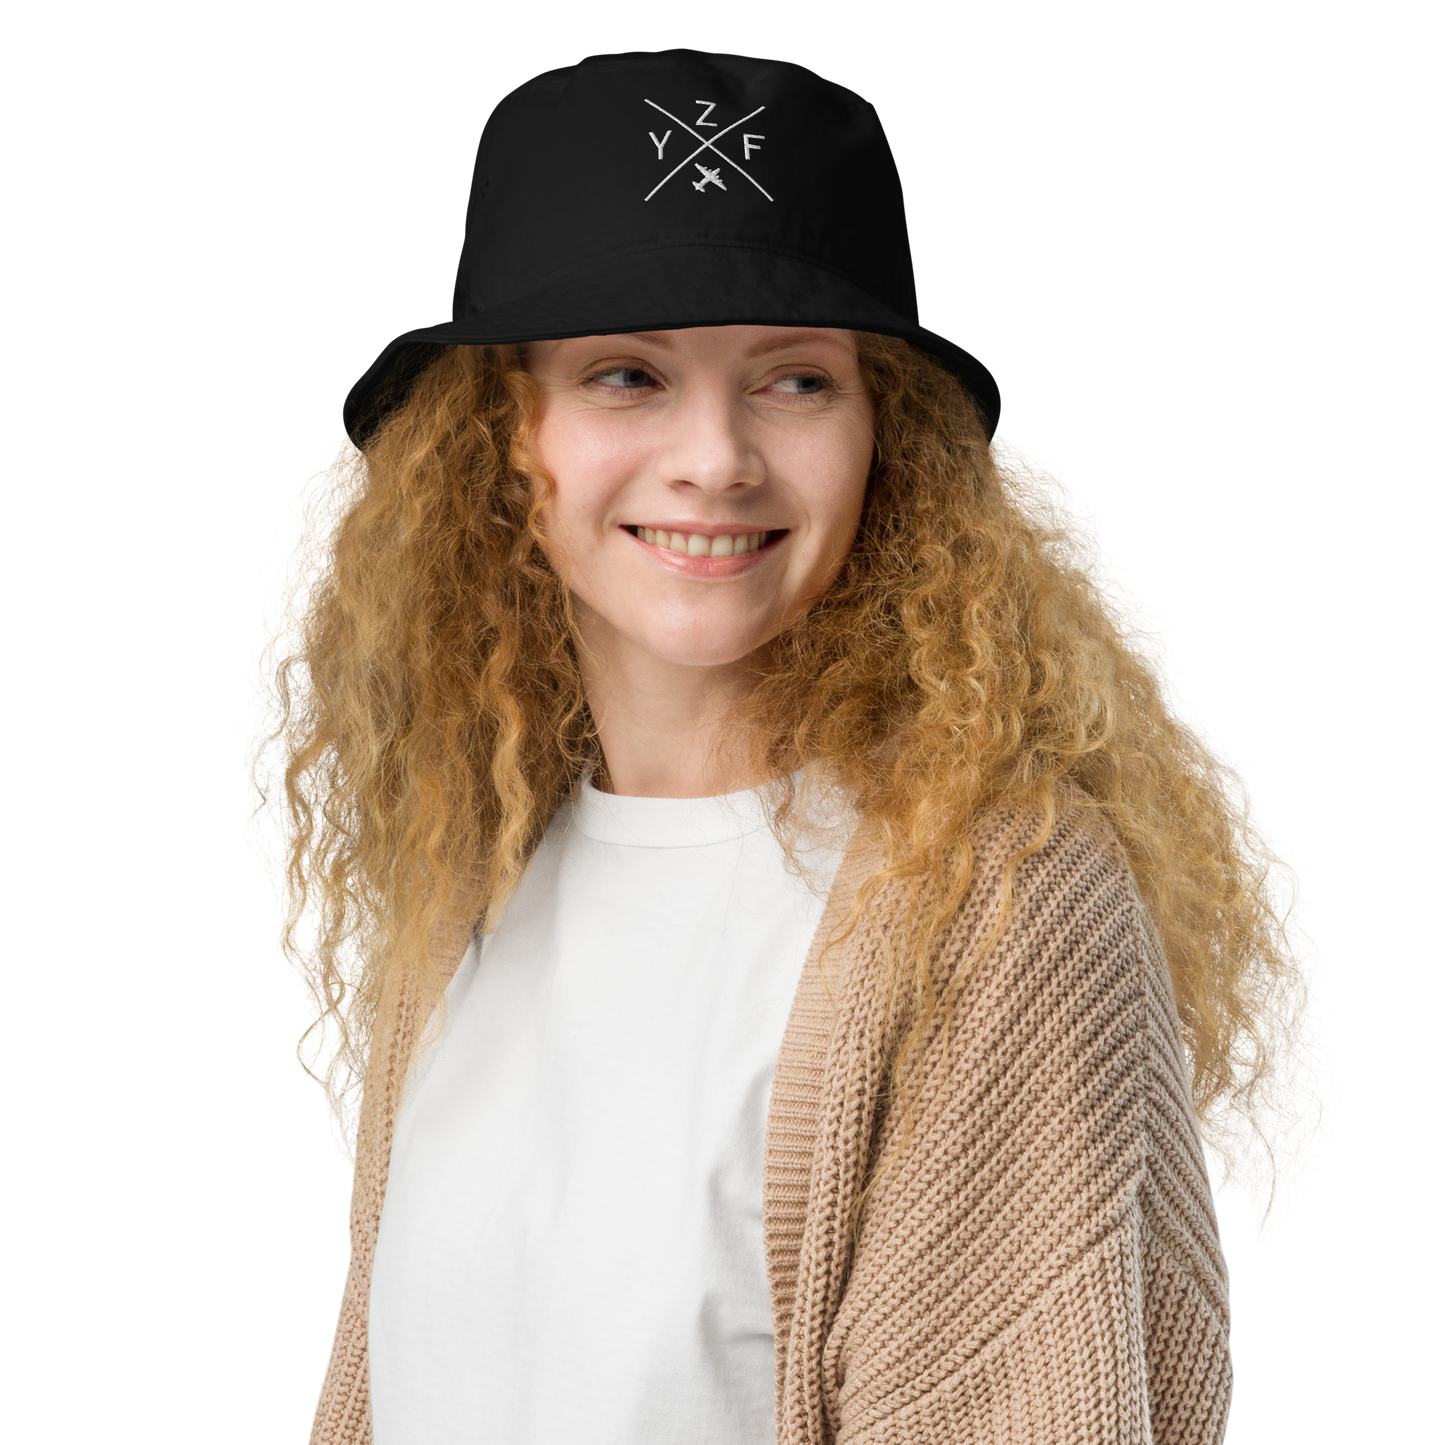 YHM Designs - YZF Yellowknife Organic Cotton Bucket Hat - Crossed-X Design with Airport Code and Vintage Propliner - White Embroidery - Image 04